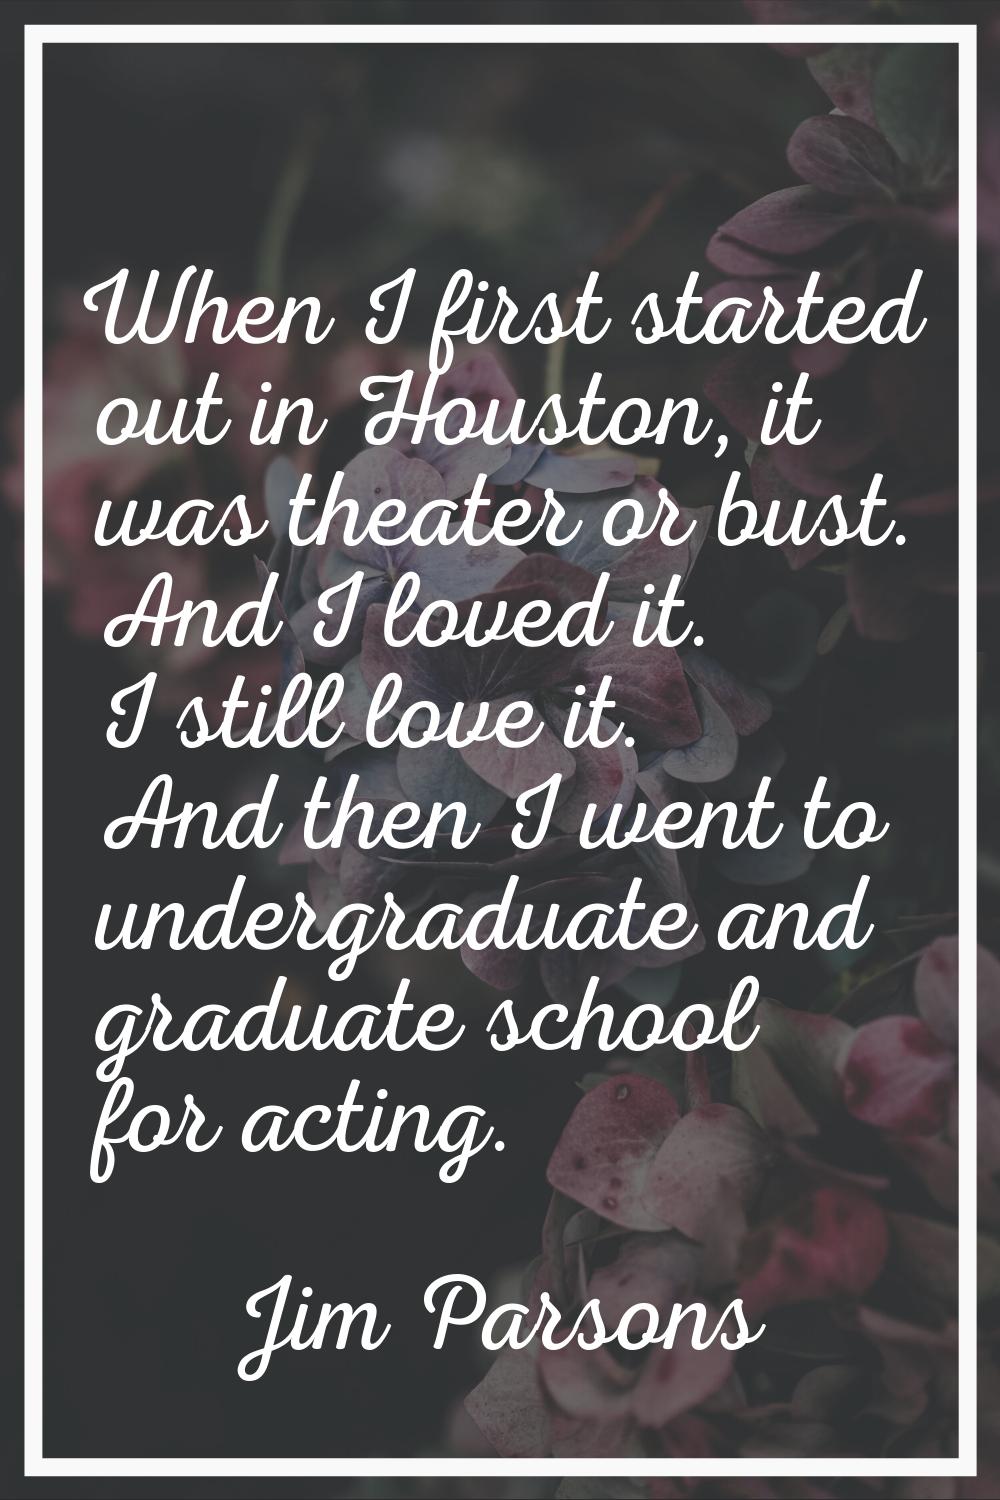 When I first started out in Houston, it was theater or bust. And I loved it. I still love it. And t